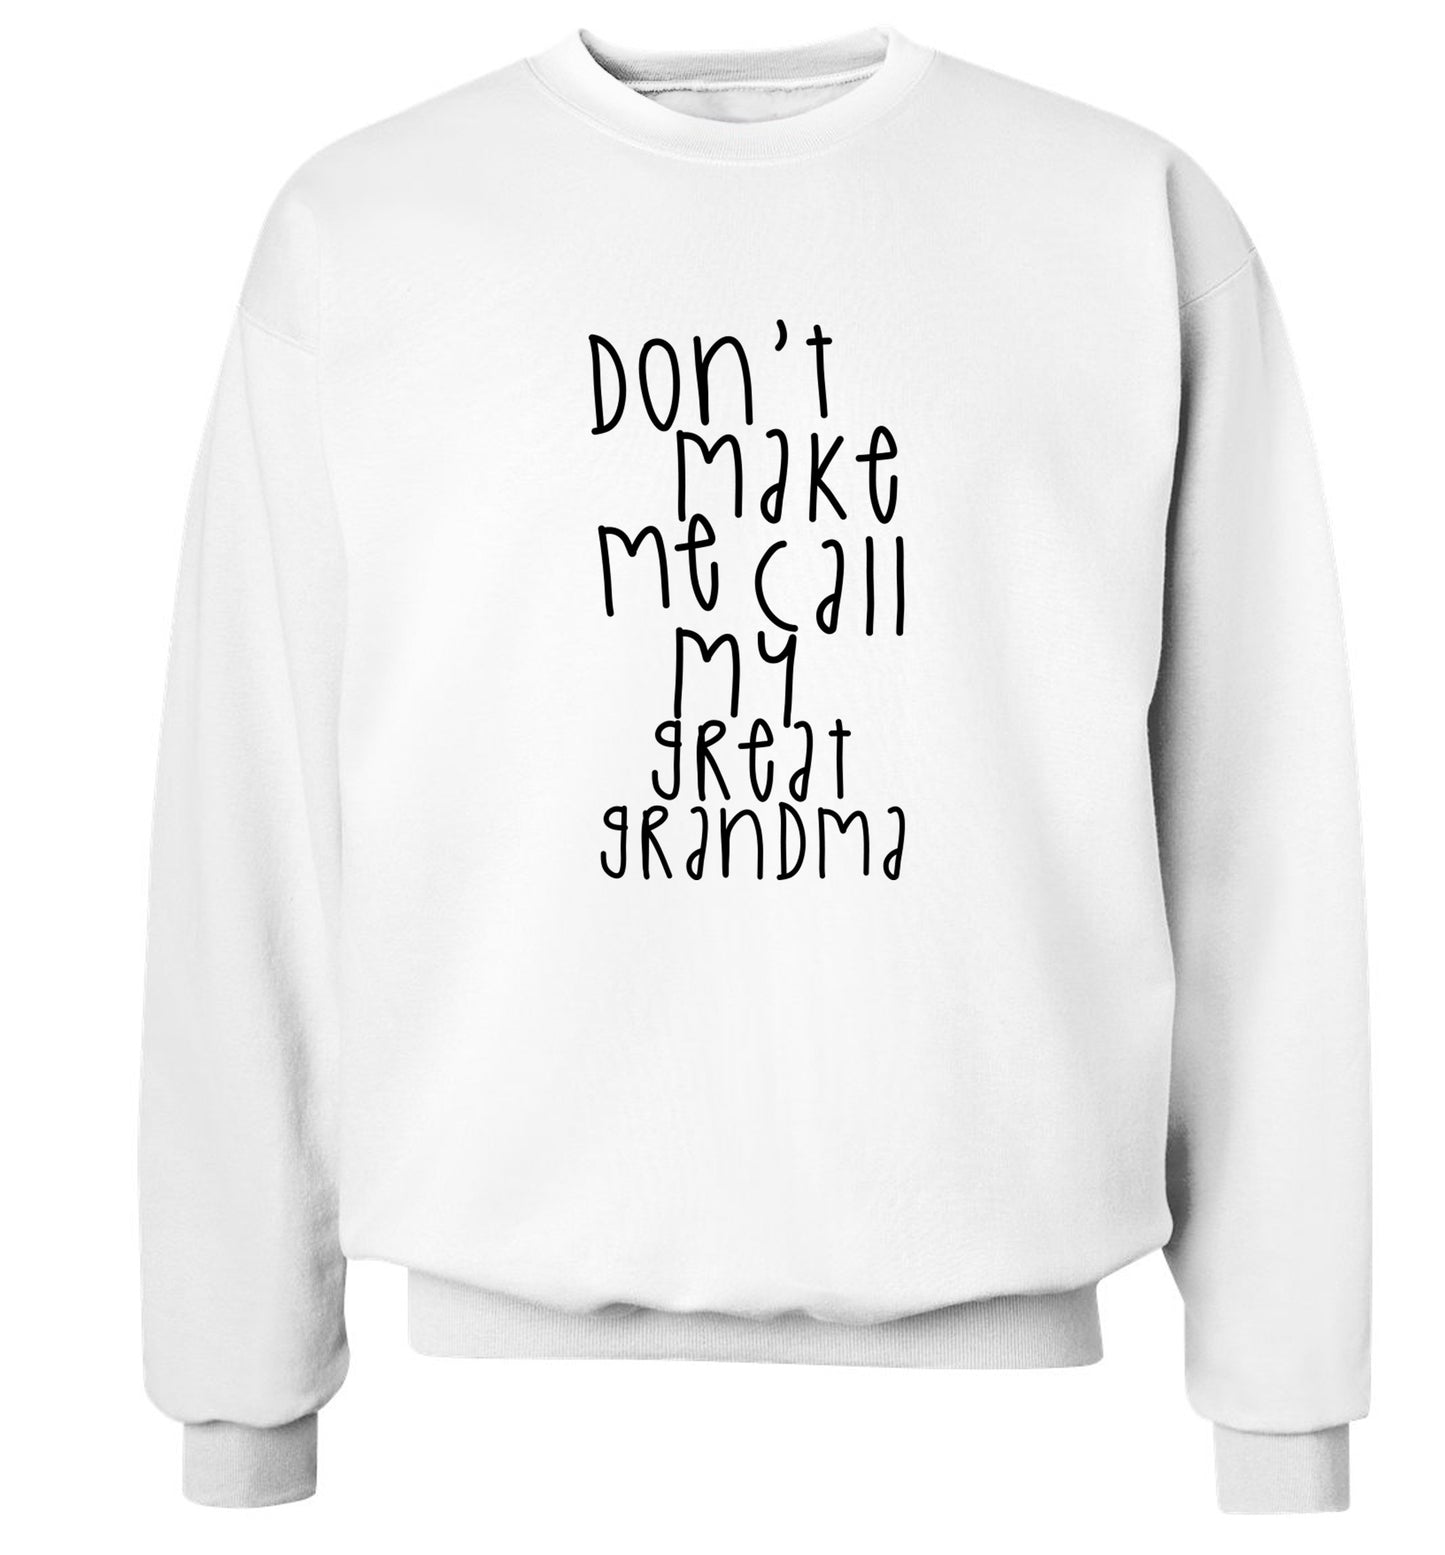 Don't make me call my great grandma Adult's unisex white Sweater 2XL